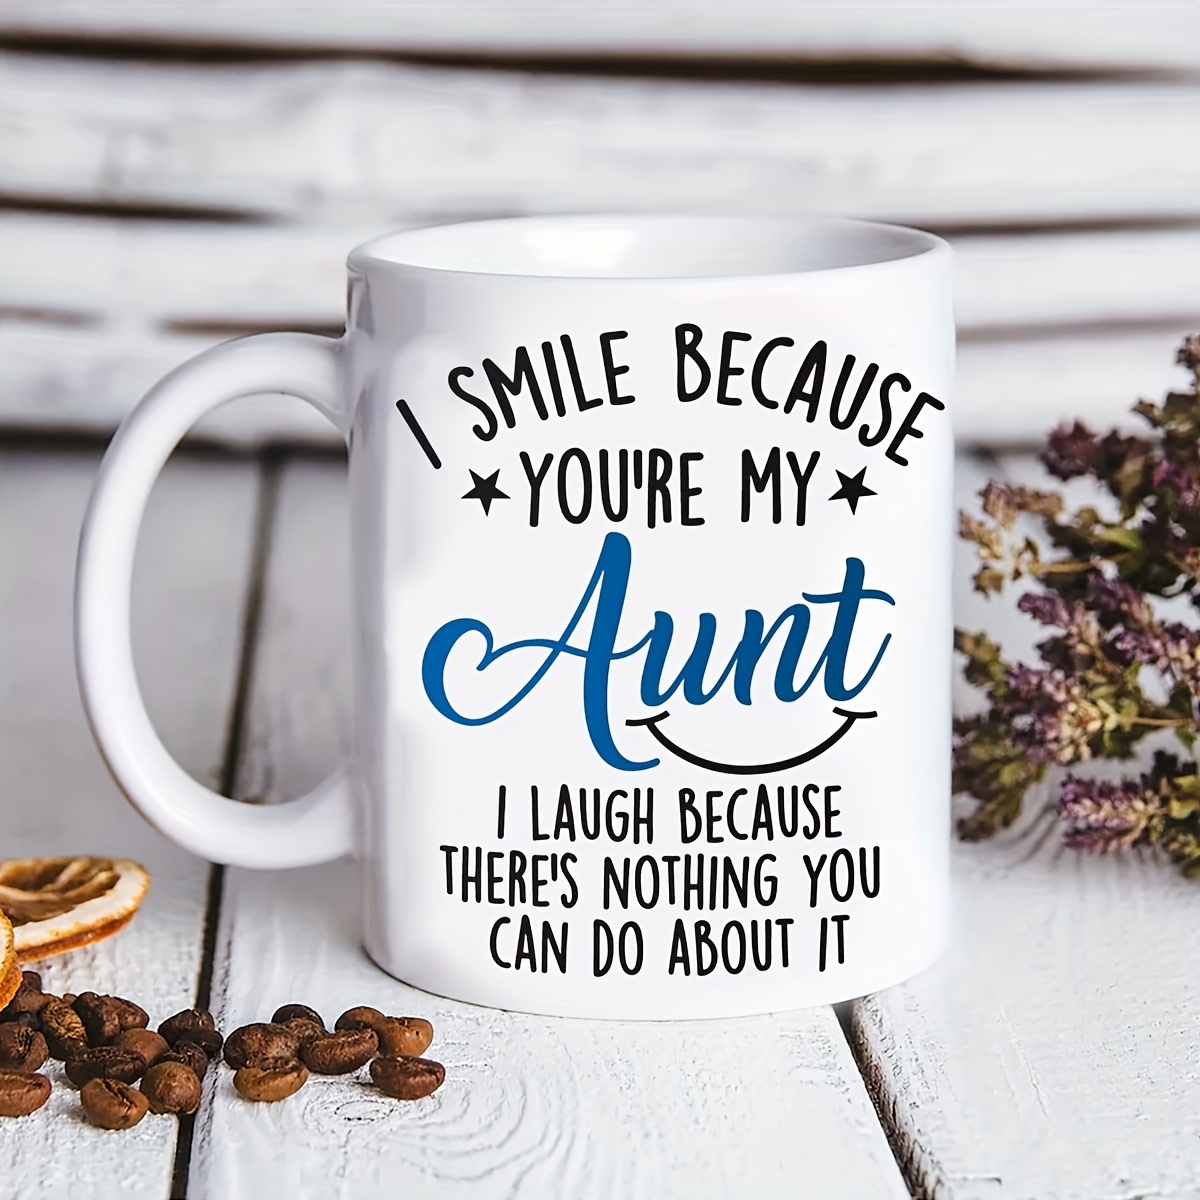 Best Auntie Gifts - 20 oz Tumbler Christmas Gift for Auntie, Aunts from  Niece, Nephew Insulated Travel Cup Unique Thanksgiving Birthday Present  Boxed Aunt Gift for Women/New Aunt/Aunt to Be/Great Aunt 